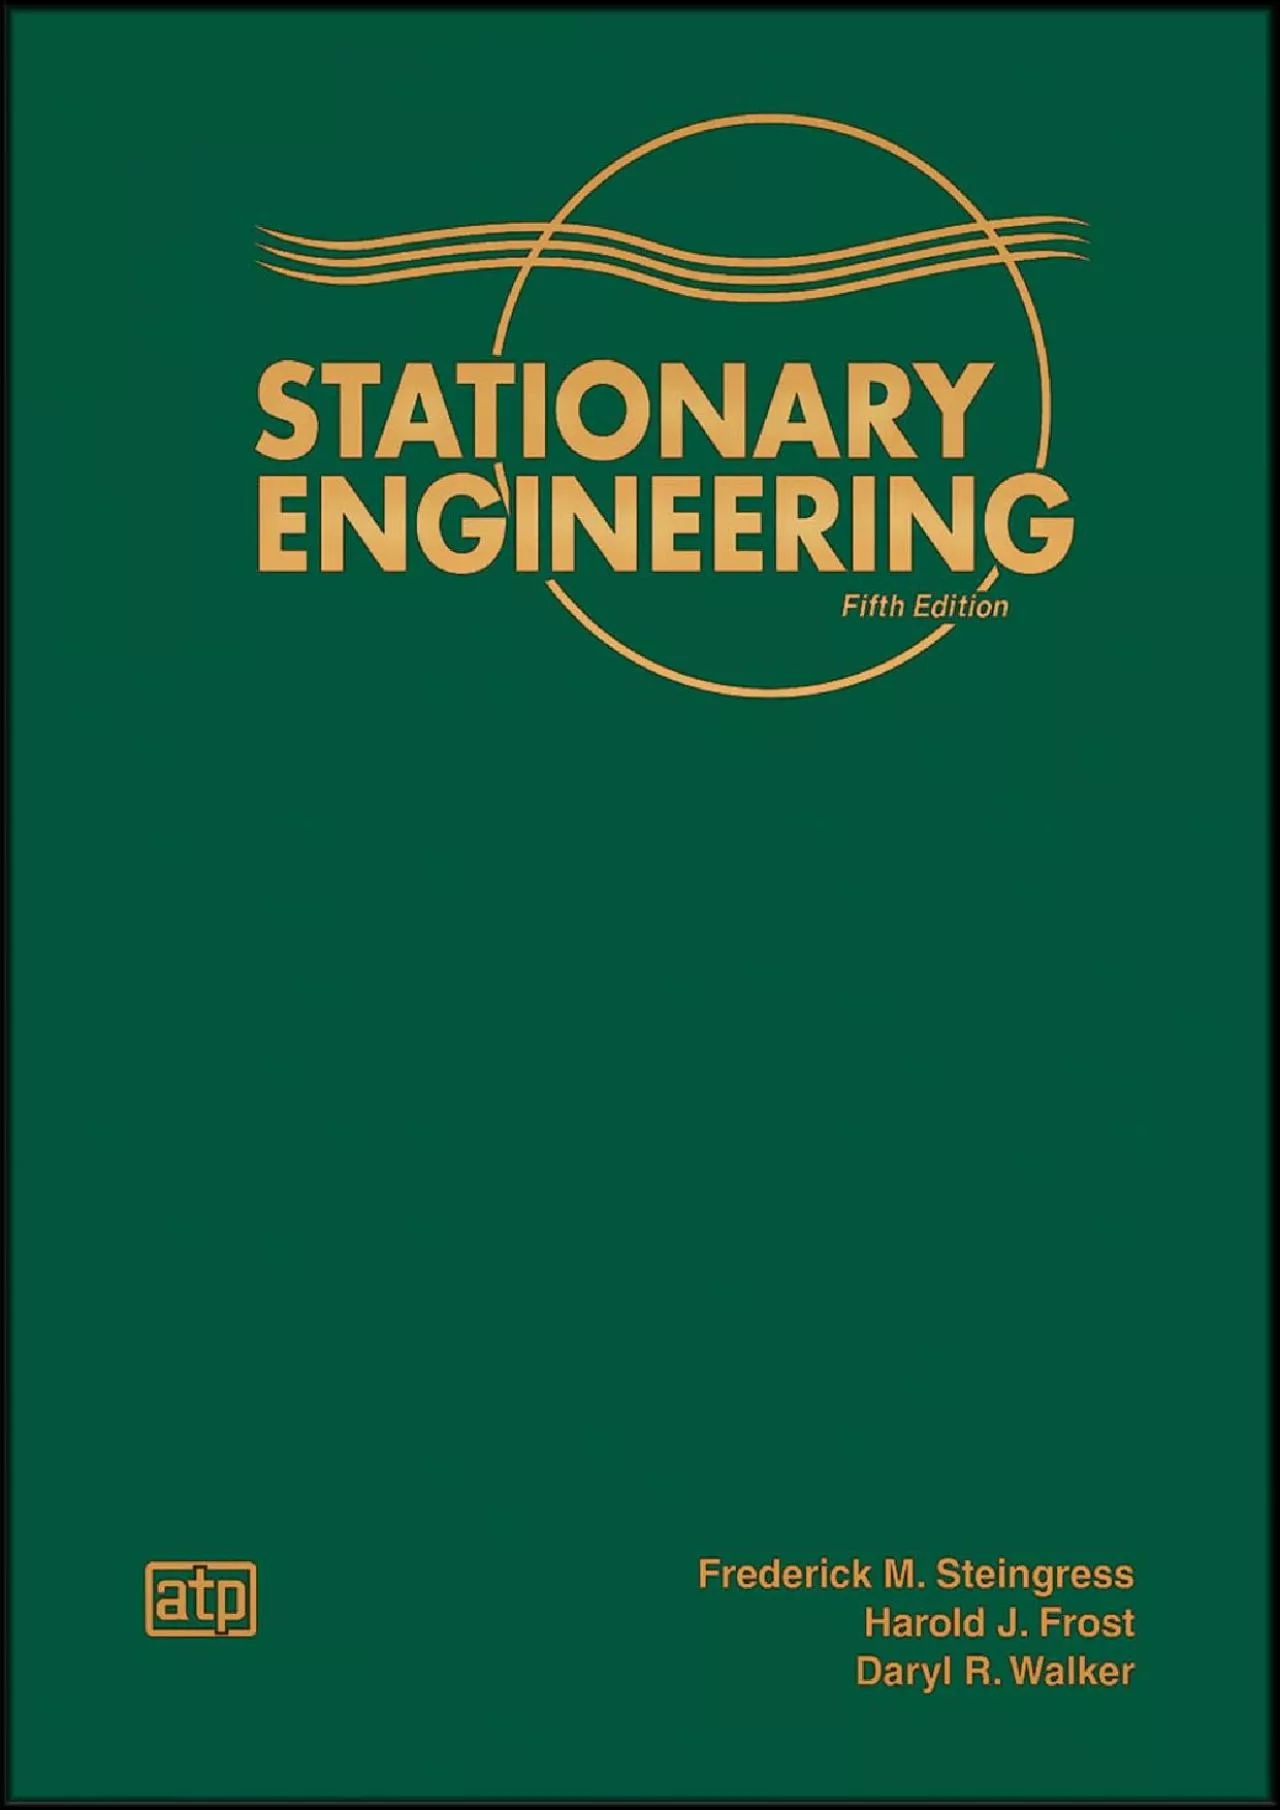 [DOWNLOAD] Stationary Engineering